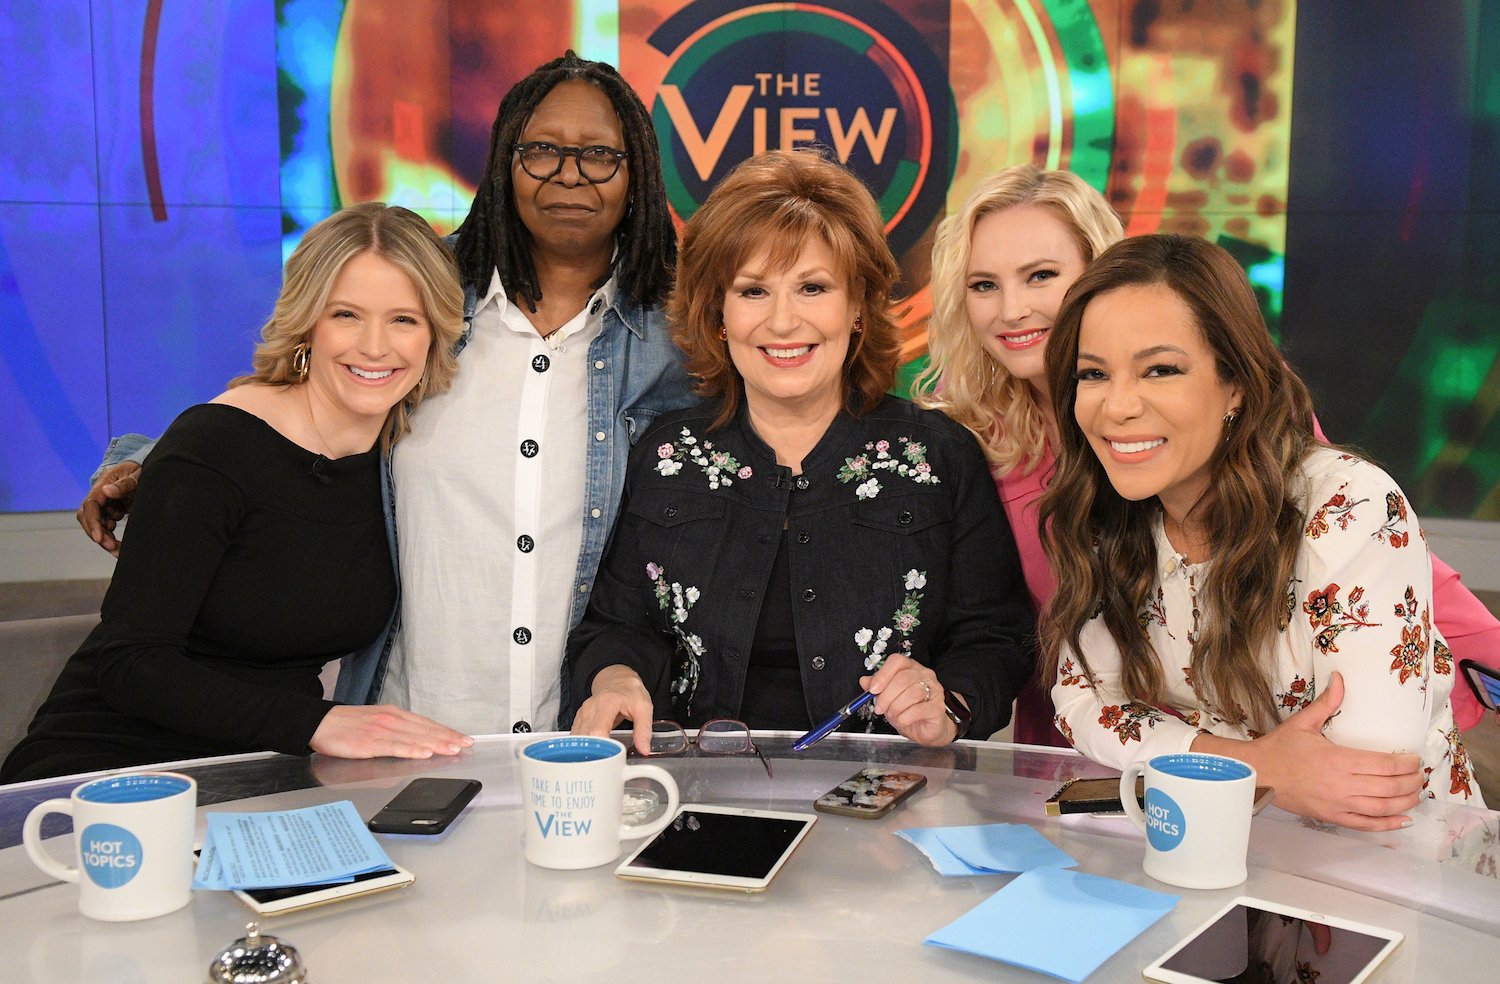 'The View' co-hosts have reportedly added tension